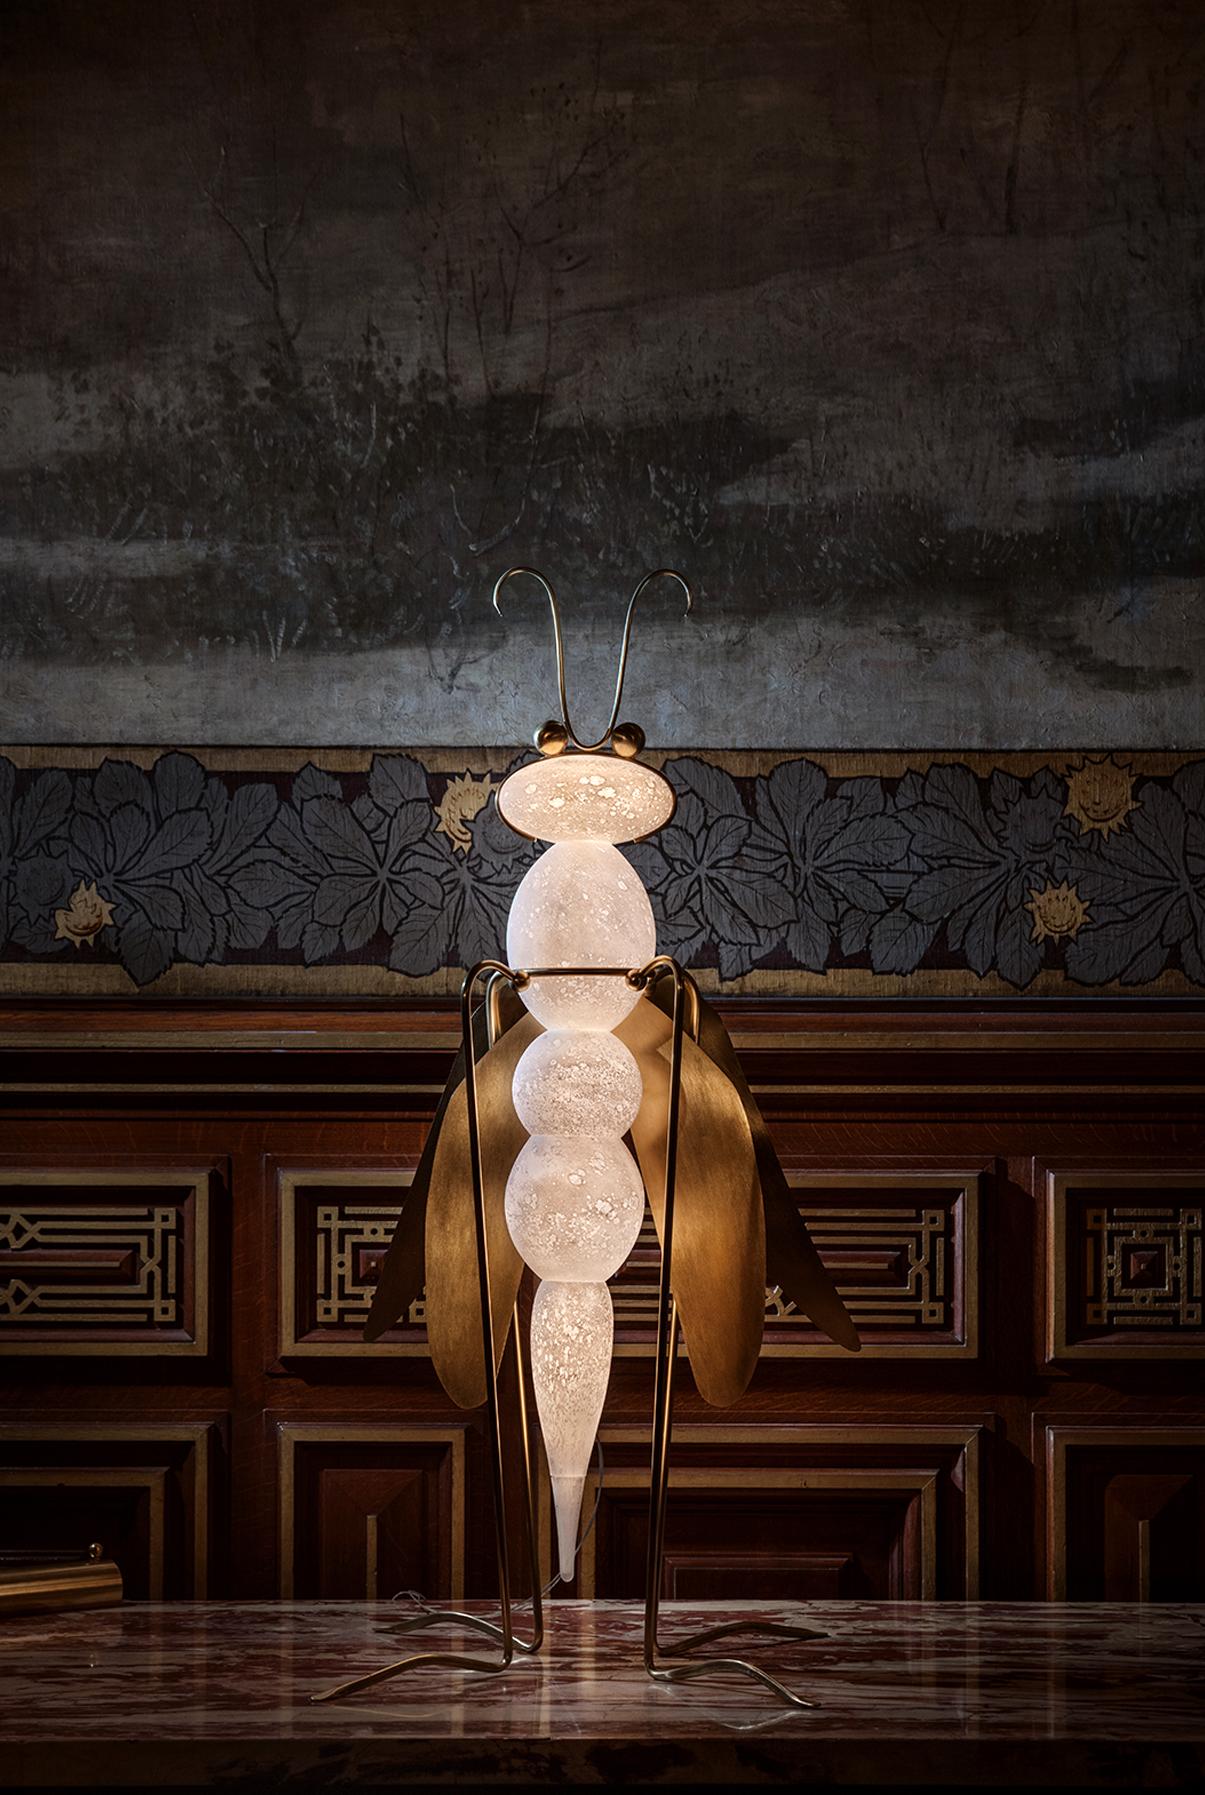 Dragonfly, floor lamp sculpture, vincent Darré and Ludovic Clément d’Armont
Blown glass, textile, brass
Dimensions: 120 x 75 x 43 cm 

Created in cooperation with designer Vincent Darré, insects are funny and original sculptures. They come from the